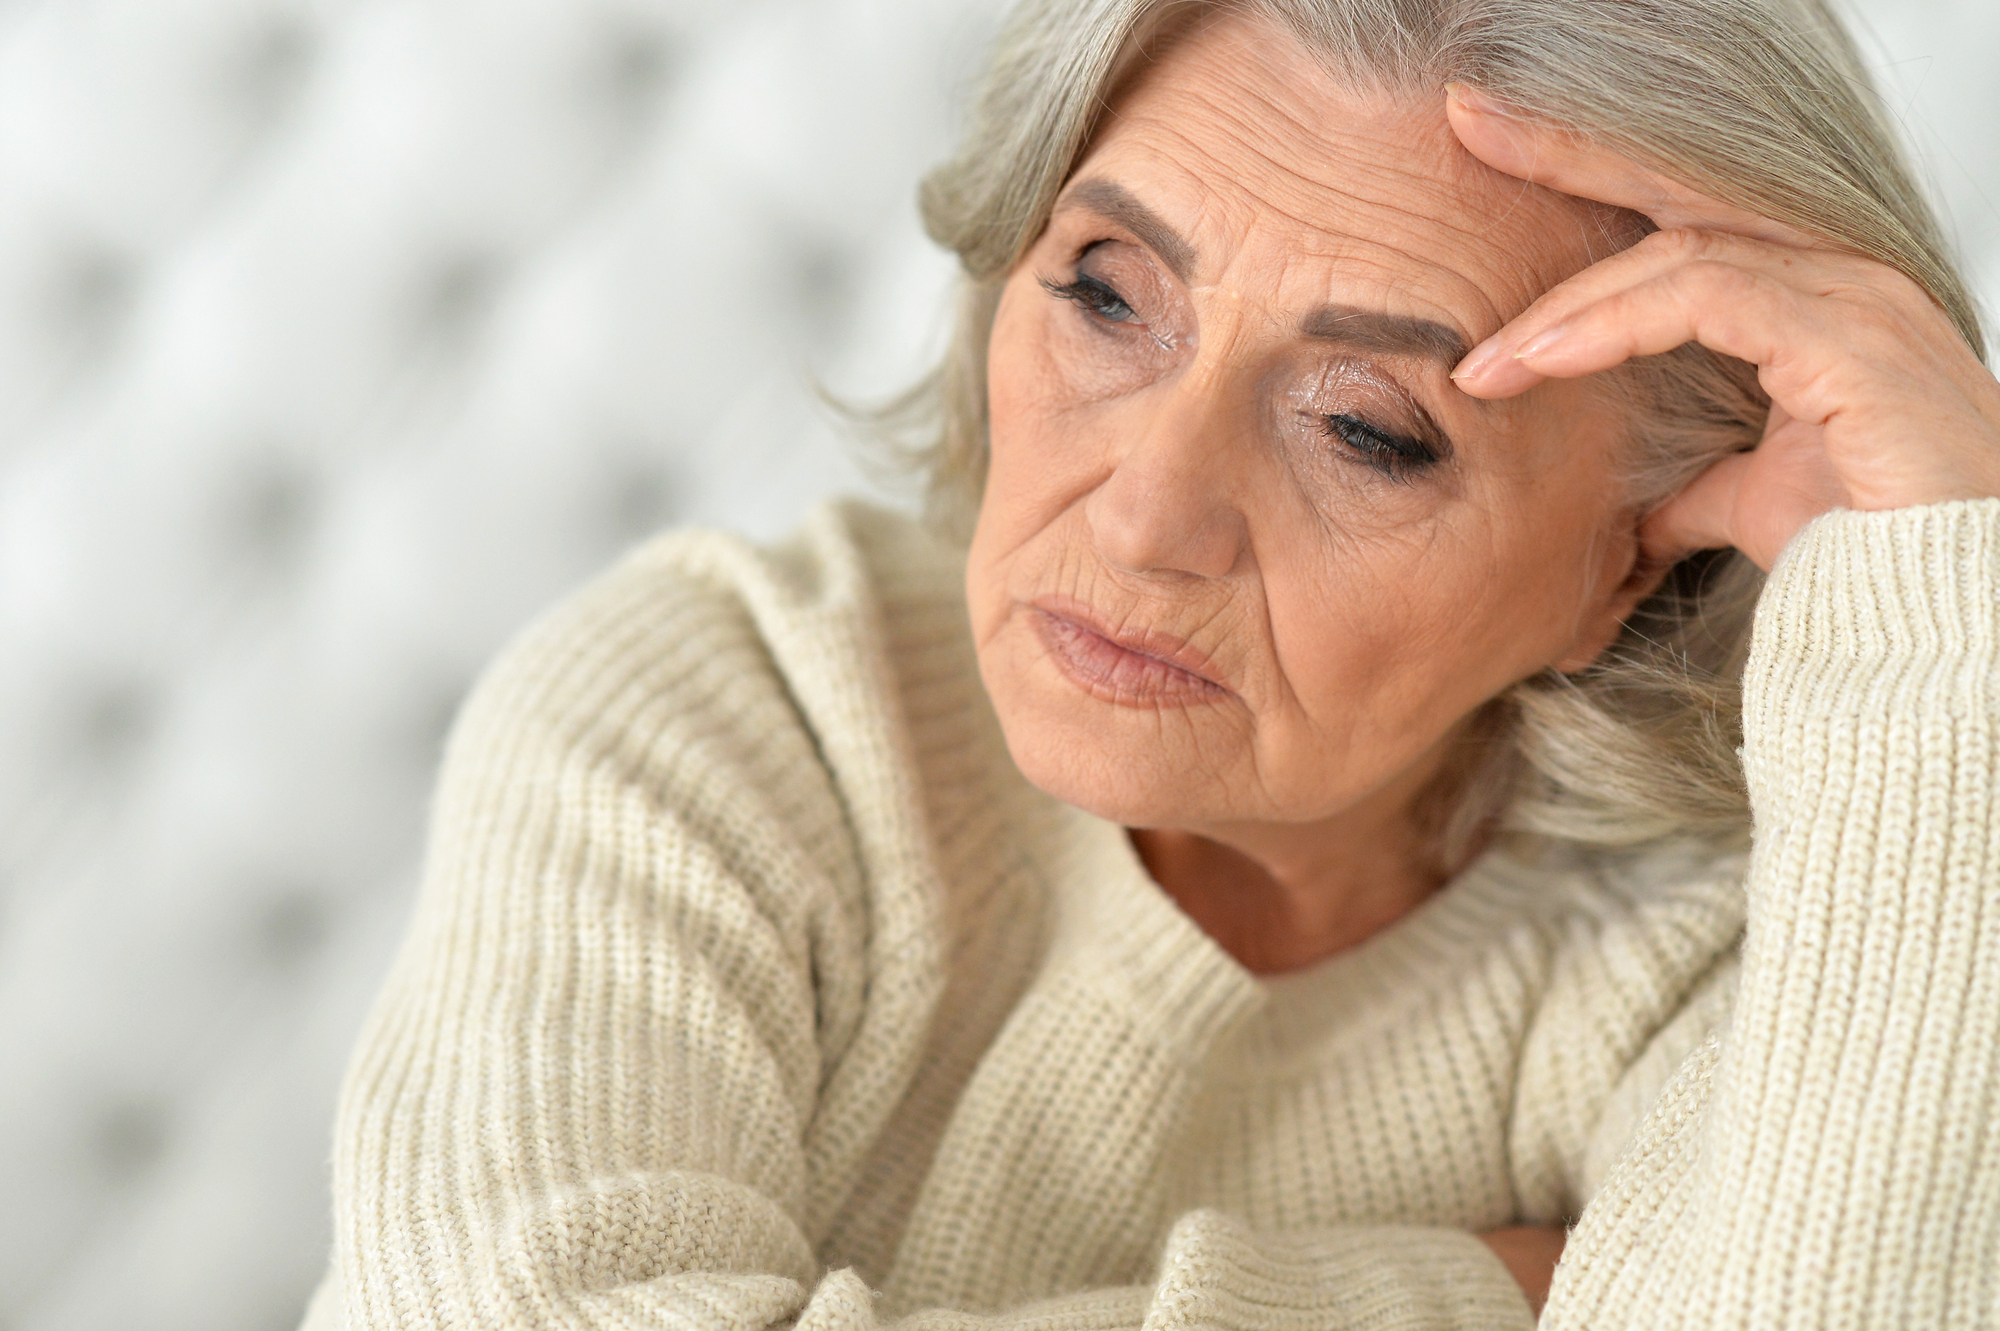 Image of a senior woman with fatigue.